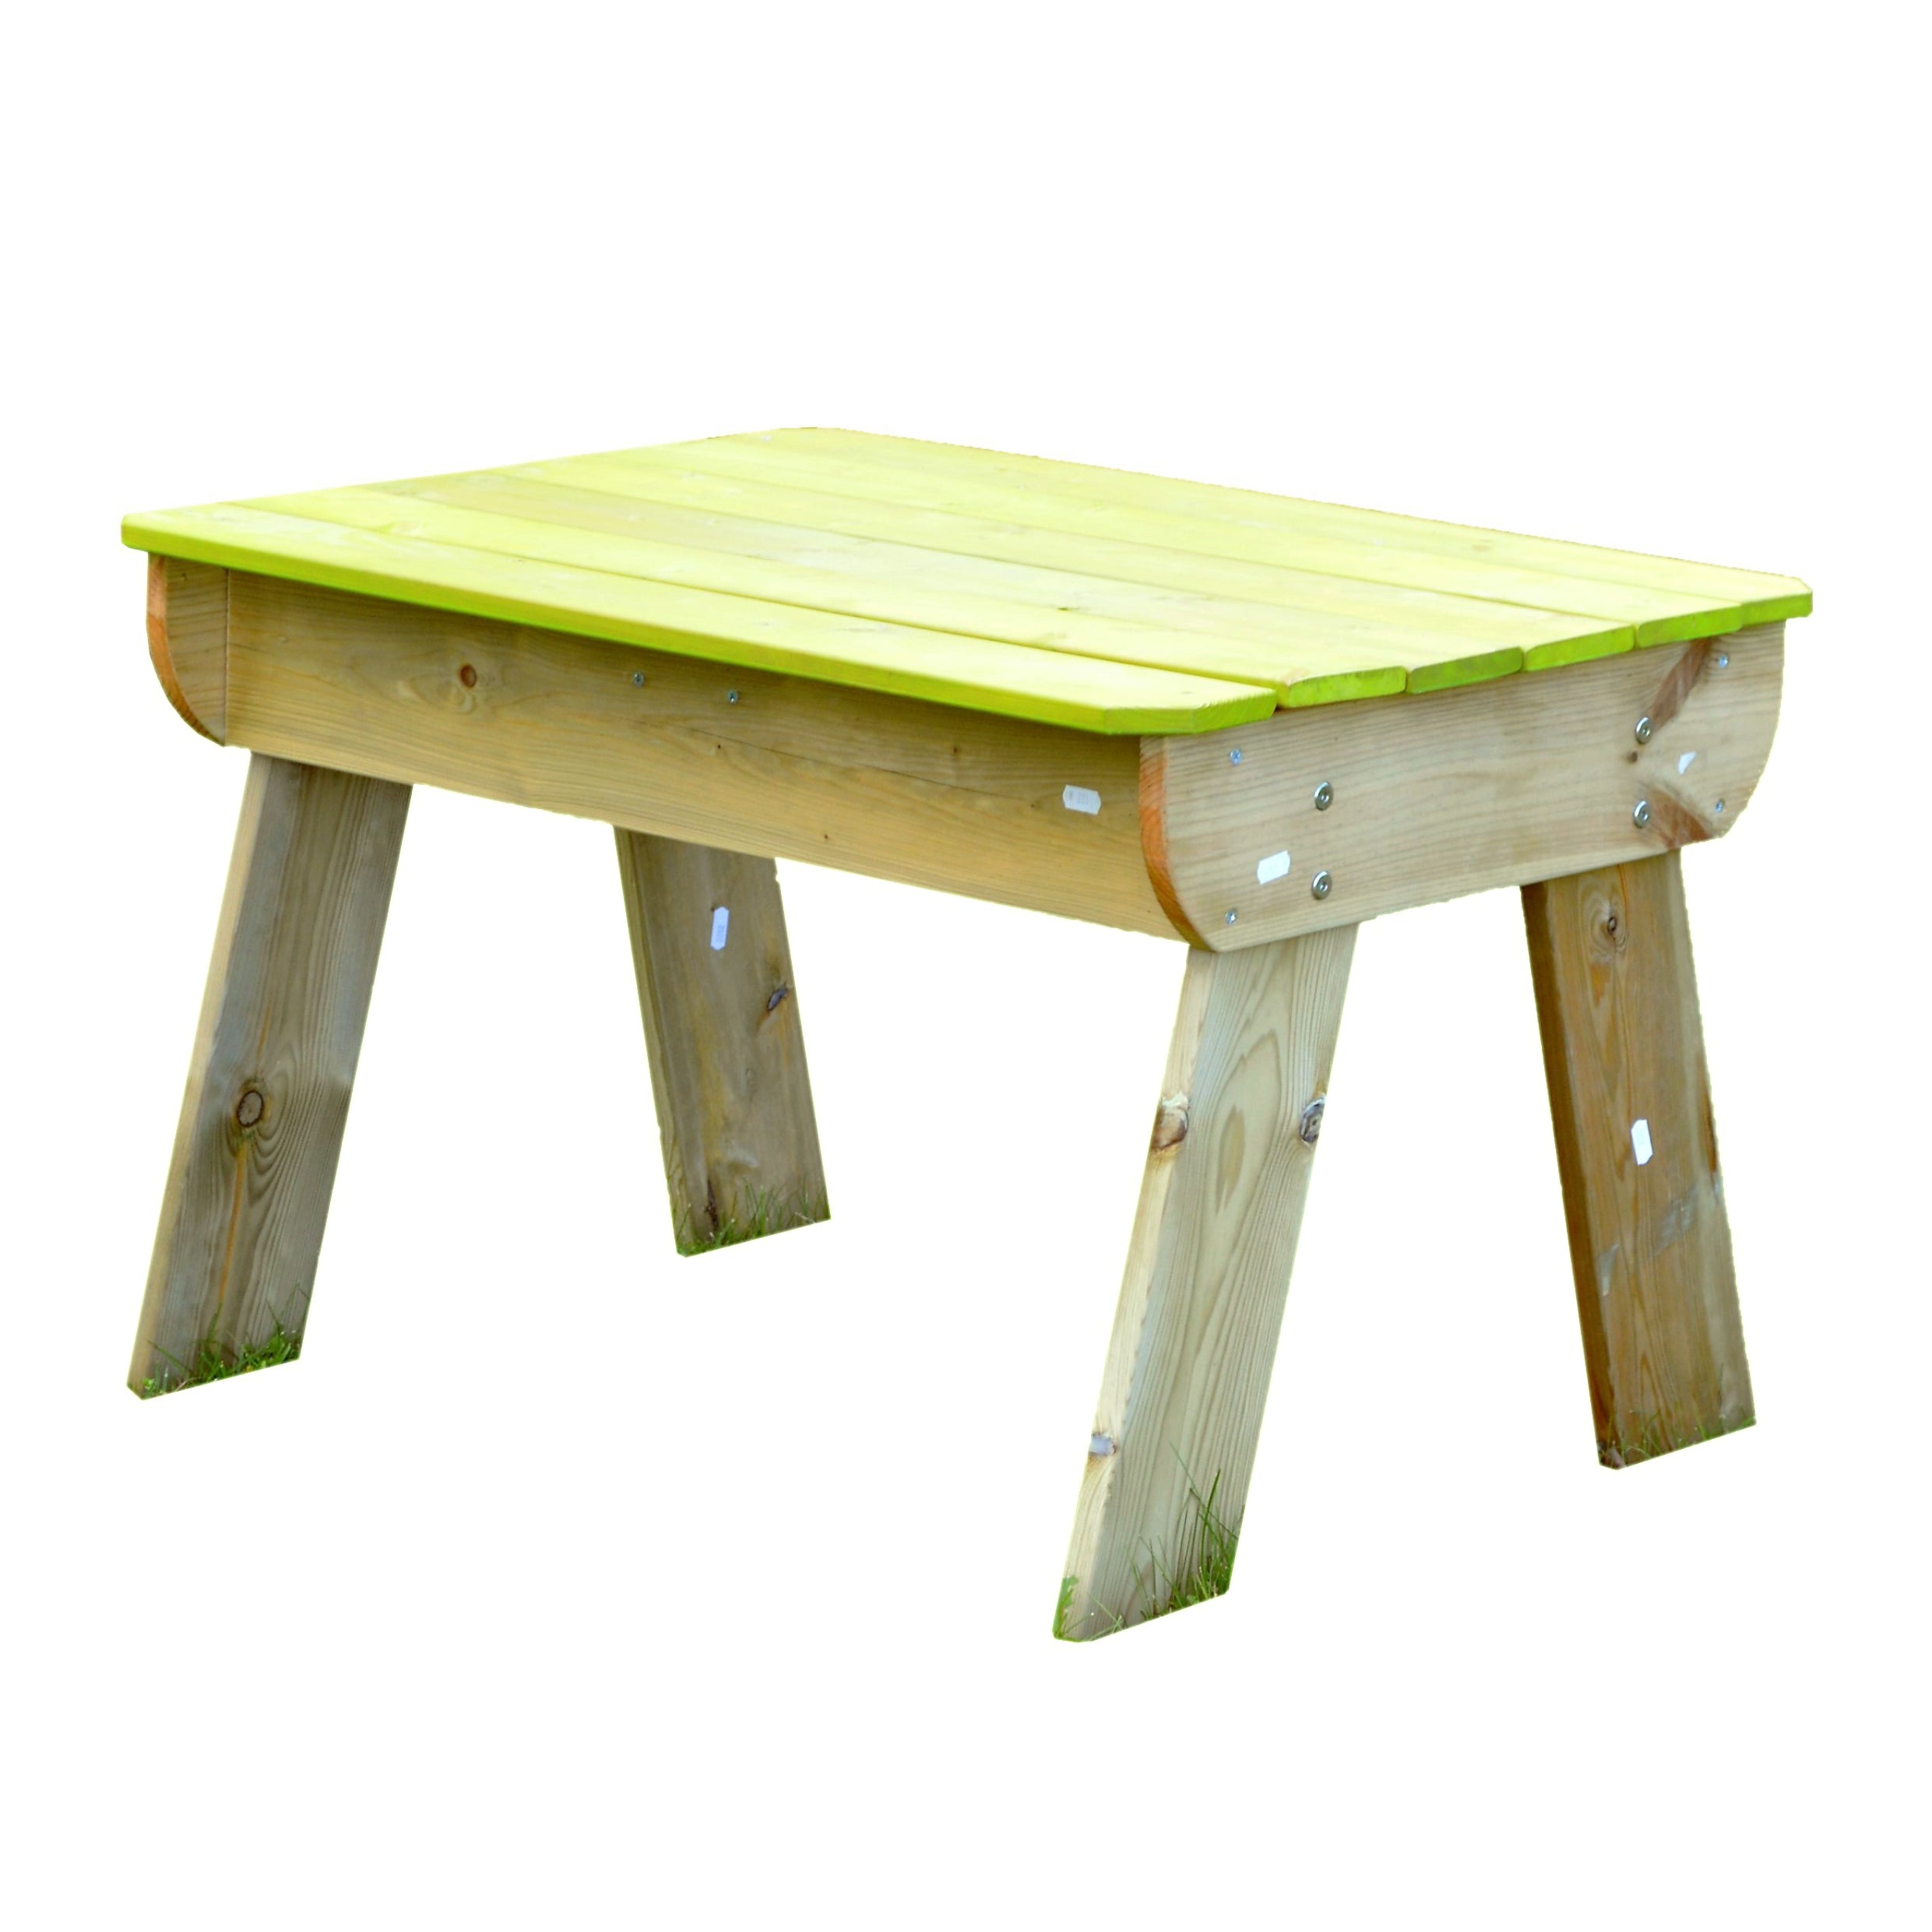 T1 Picnic Table